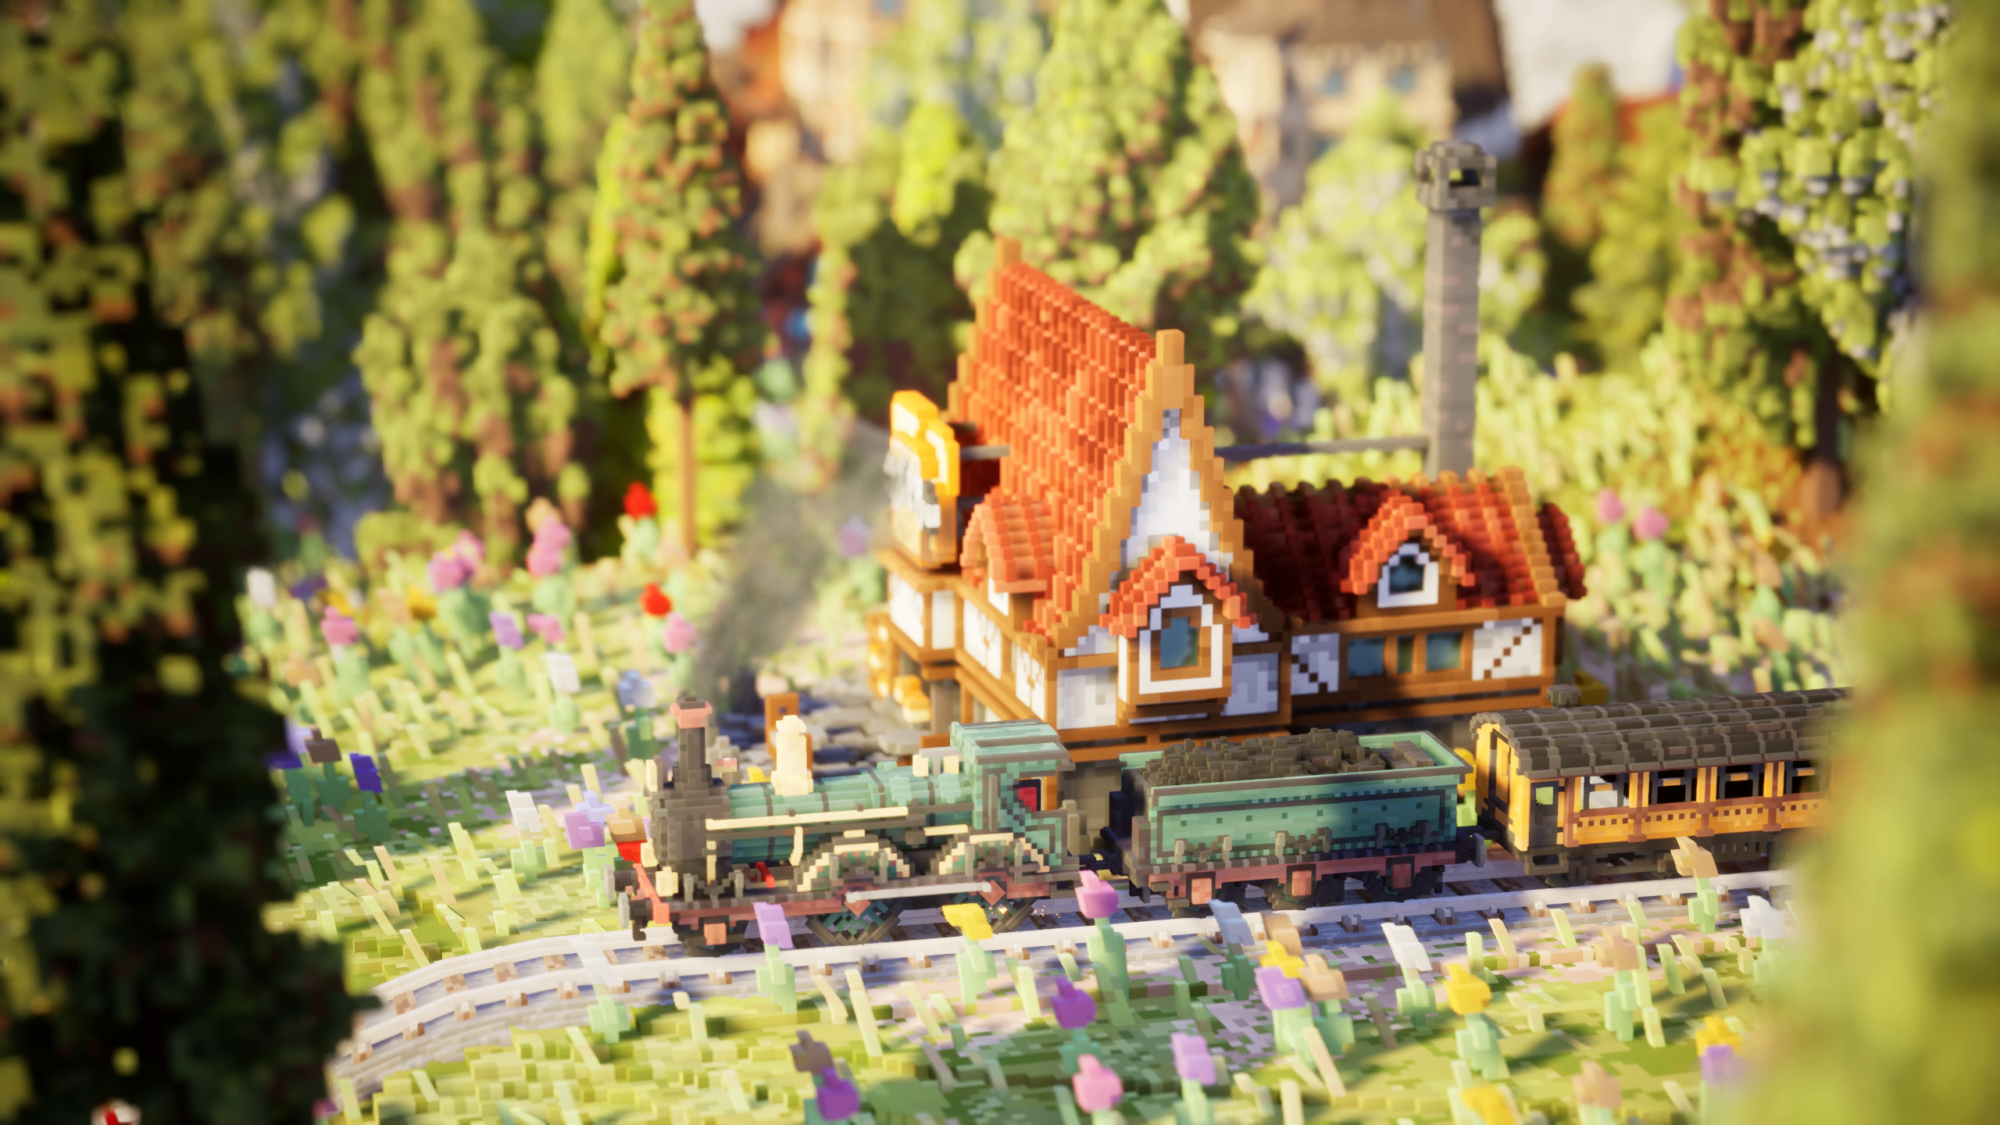 Screenshot from Station to Station showing a train pulling into a sawmill